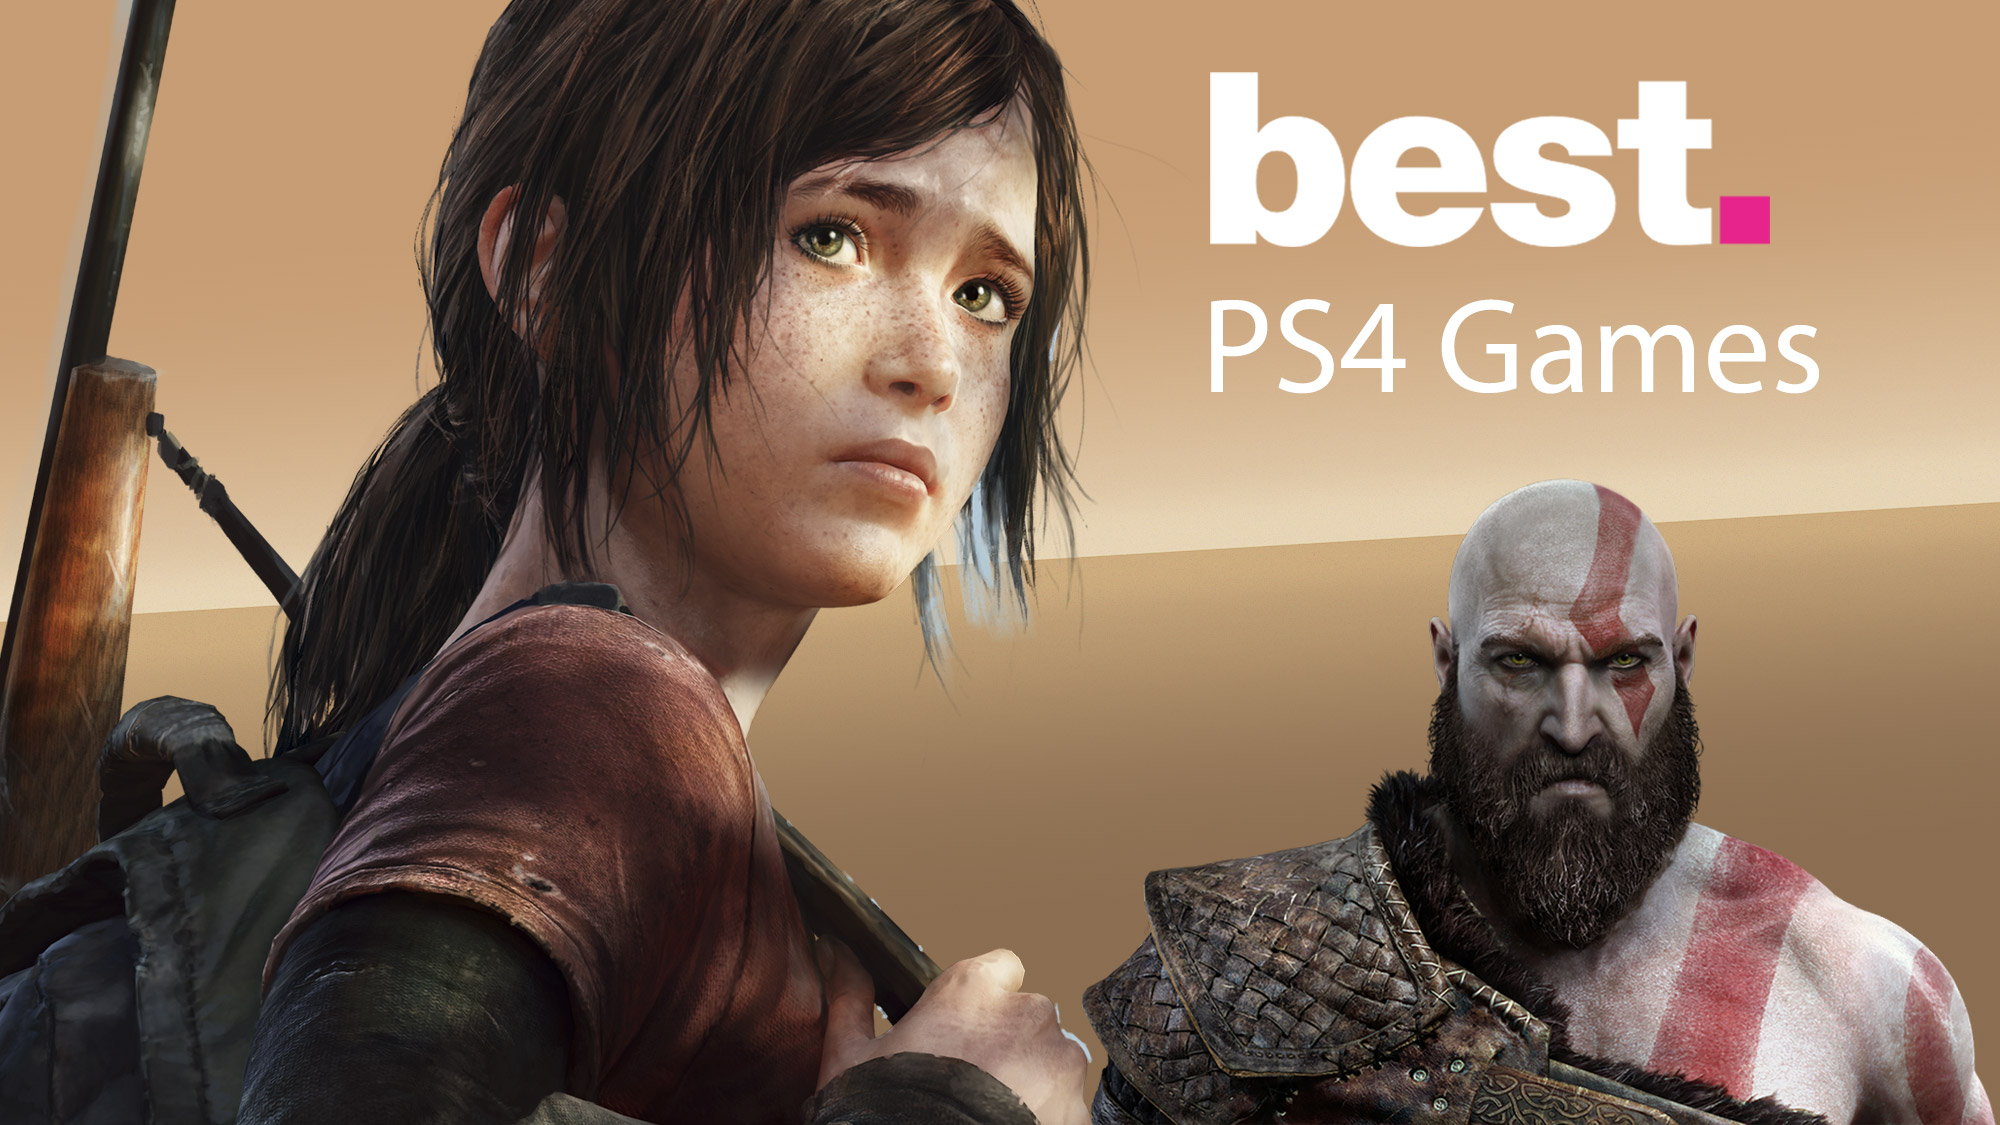 Best PS4 games 2021: the PlayStation 4 